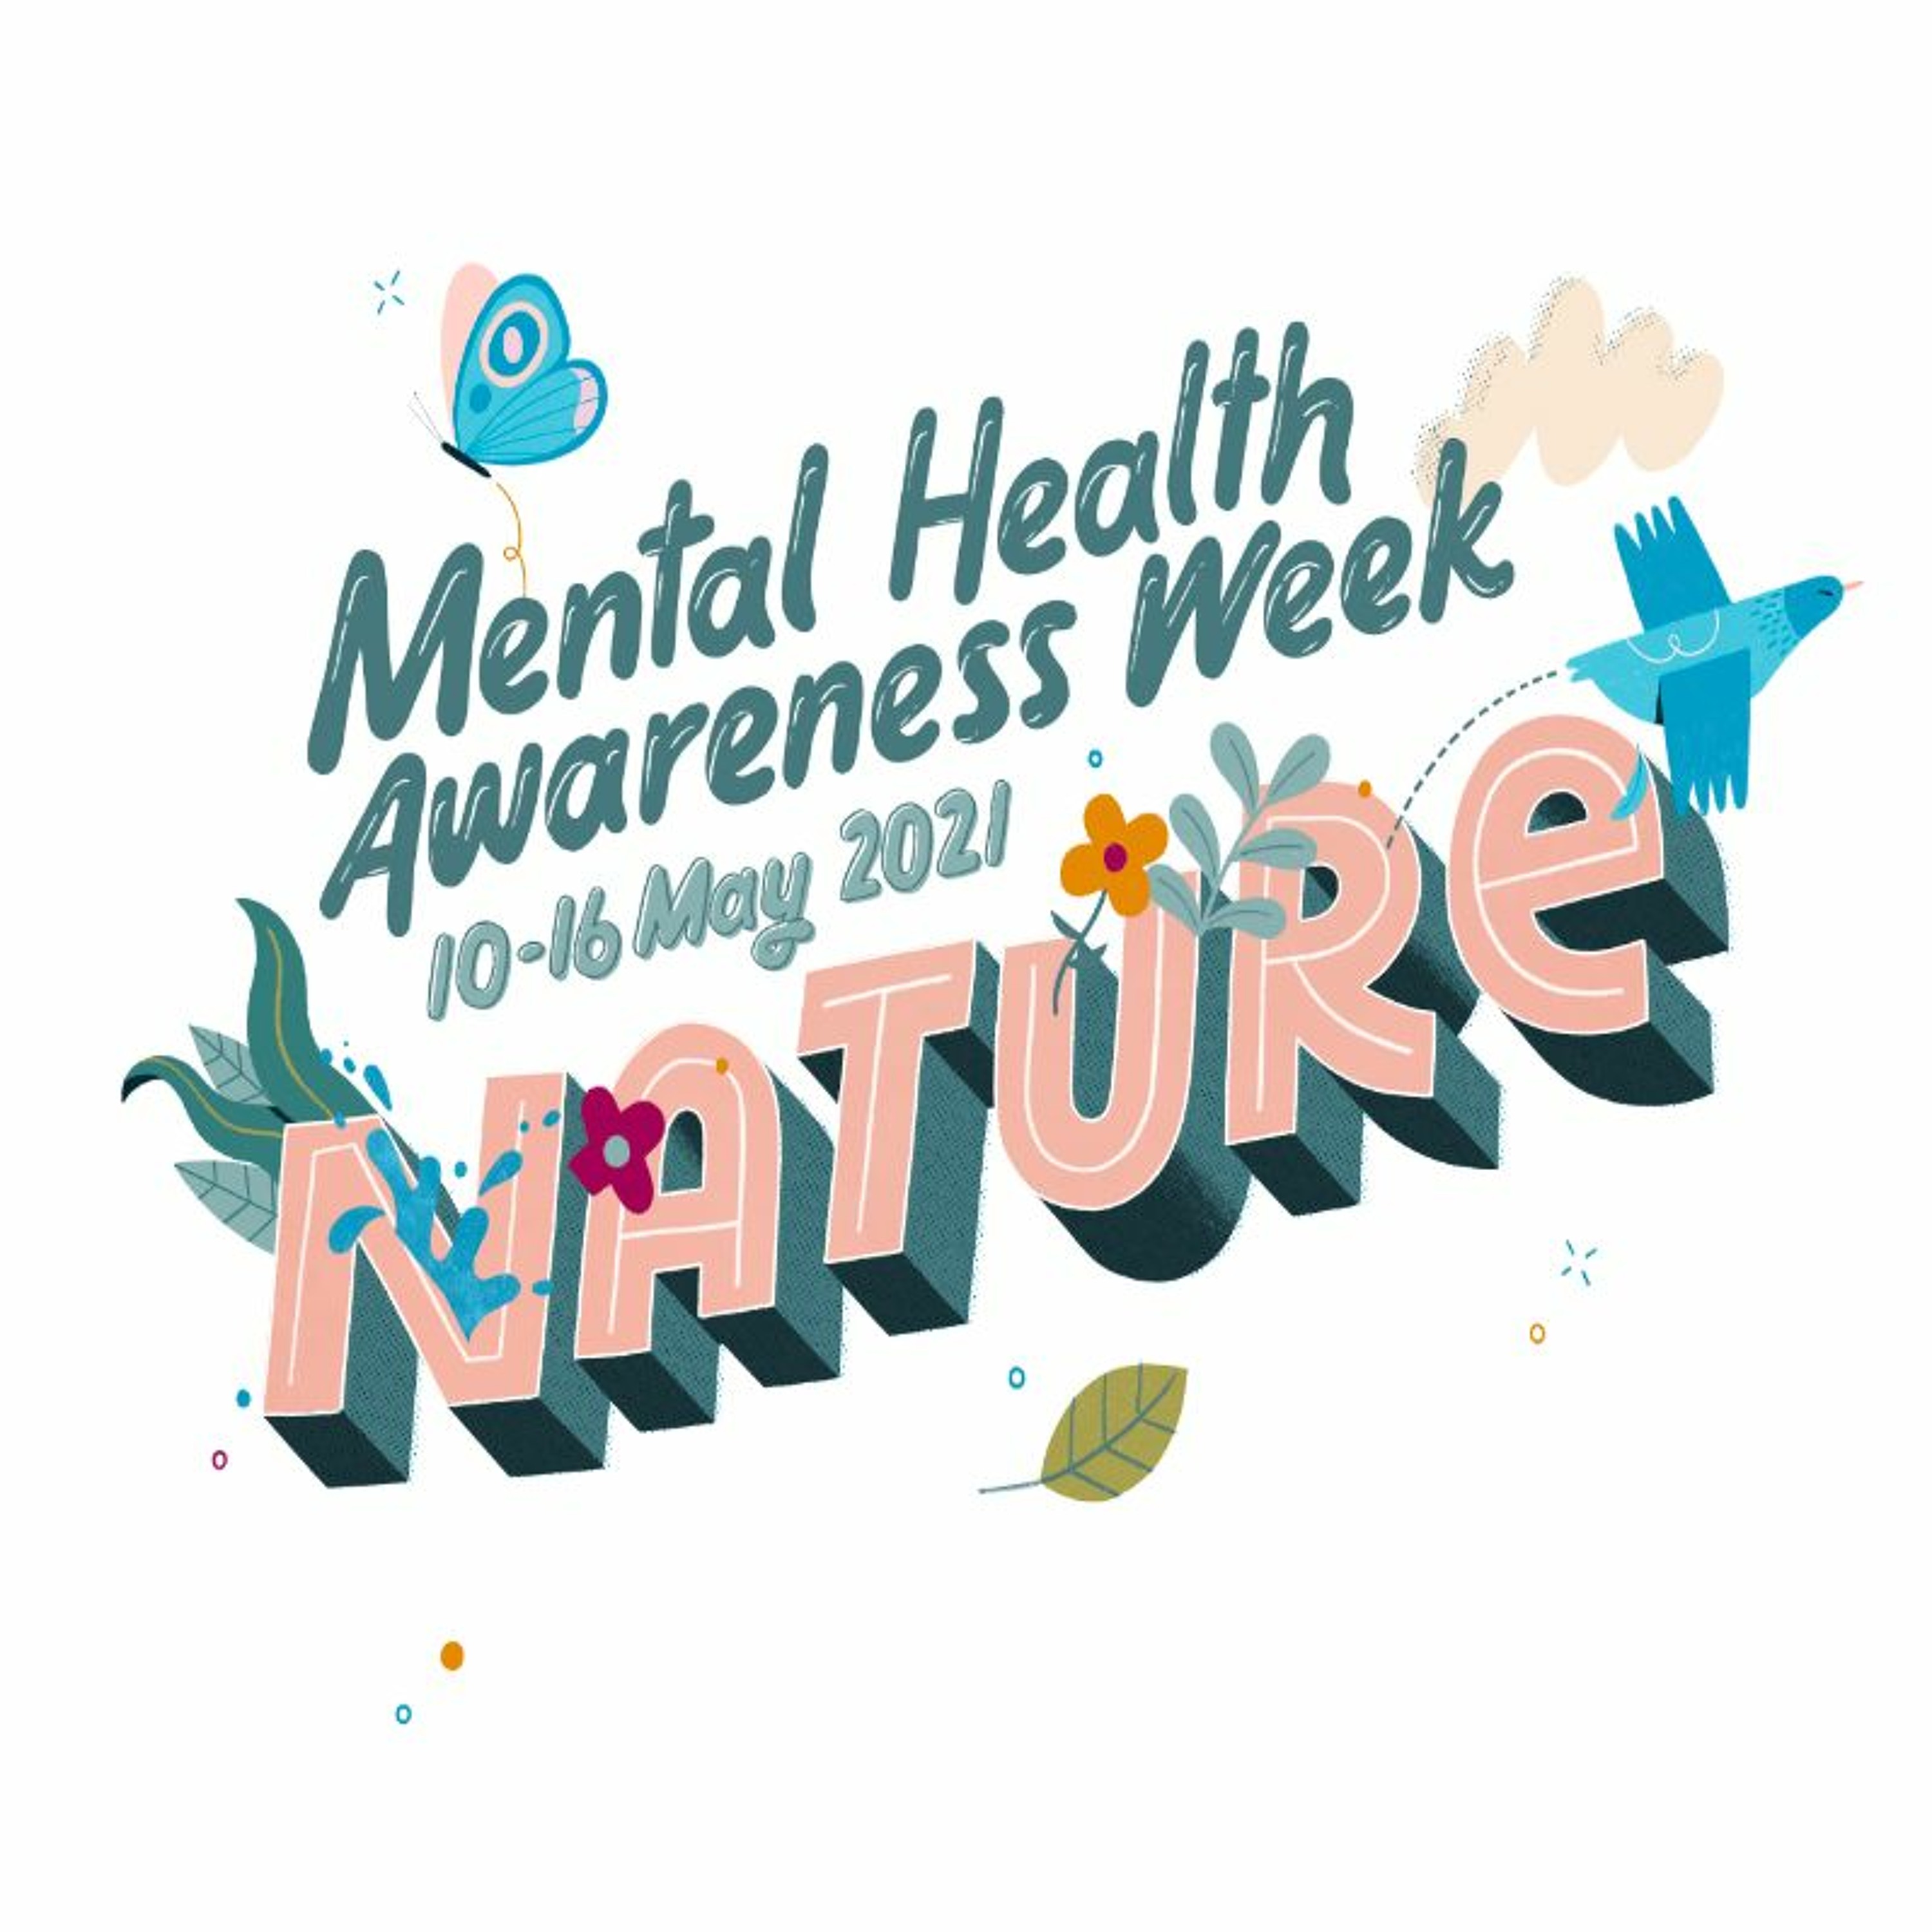 Let's Talk: Mental Health - Connecting with nature to support our mental health